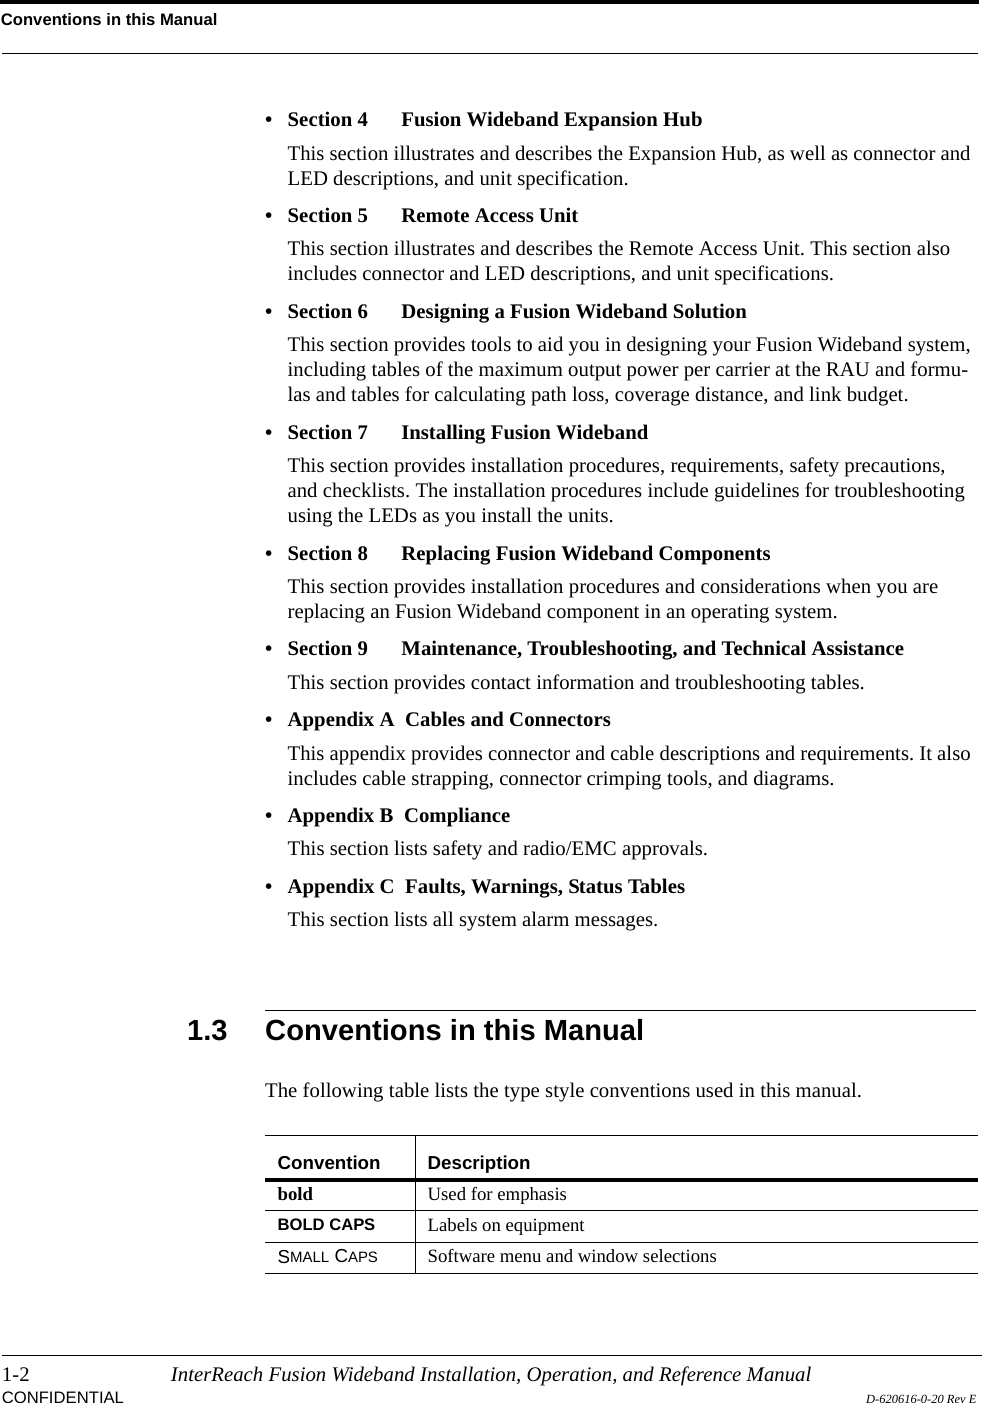 Conventions in this Manual1-2 InterReach Fusion Wideband Installation, Operation, and Reference ManualCONFIDENTIAL D-620616-0-20 Rev E• Section 4   Fusion Wideband Expansion HubThis section illustrates and describes the Expansion Hub, as well as connector and LED descriptions, and unit specification.• Section 5   Remote Access UnitThis section illustrates and describes the Remote Access Unit. This section also includes connector and LED descriptions, and unit specifications.• Section 6   Designing a Fusion Wideband SolutionThis section provides tools to aid you in designing your Fusion Wideband system, including tables of the maximum output power per carrier at the RAU and formu-las and tables for calculating path loss, coverage distance, and link budget.• Section 7   Installing Fusion WidebandThis section provides installation procedures, requirements, safety precautions, and checklists. The installation procedures include guidelines for troubleshooting using the LEDs as you install the units.• Section 8   Replacing Fusion Wideband ComponentsThis section provides installation procedures and considerations when you are replacing an Fusion Wideband component in an operating system.• Section 9  Maintenance, Troubleshooting, and Technical AssistanceThis section provides contact information and troubleshooting tables.• Appendix A  Cables and ConnectorsThis appendix provides connector and cable descriptions and requirements. It also includes cable strapping, connector crimping tools, and diagrams.• Appendix B  ComplianceThis section lists safety and radio/EMC approvals.• Appendix C  Faults, Warnings, Status TablesThis section lists all system alarm messages.1.3 Conventions in this ManualThe following table lists the type style conventions used in this manual.Convention Descriptionbold Used for emphasisBOLD CAPS Labels on equipmentSMALL CAPS Software menu and window selections